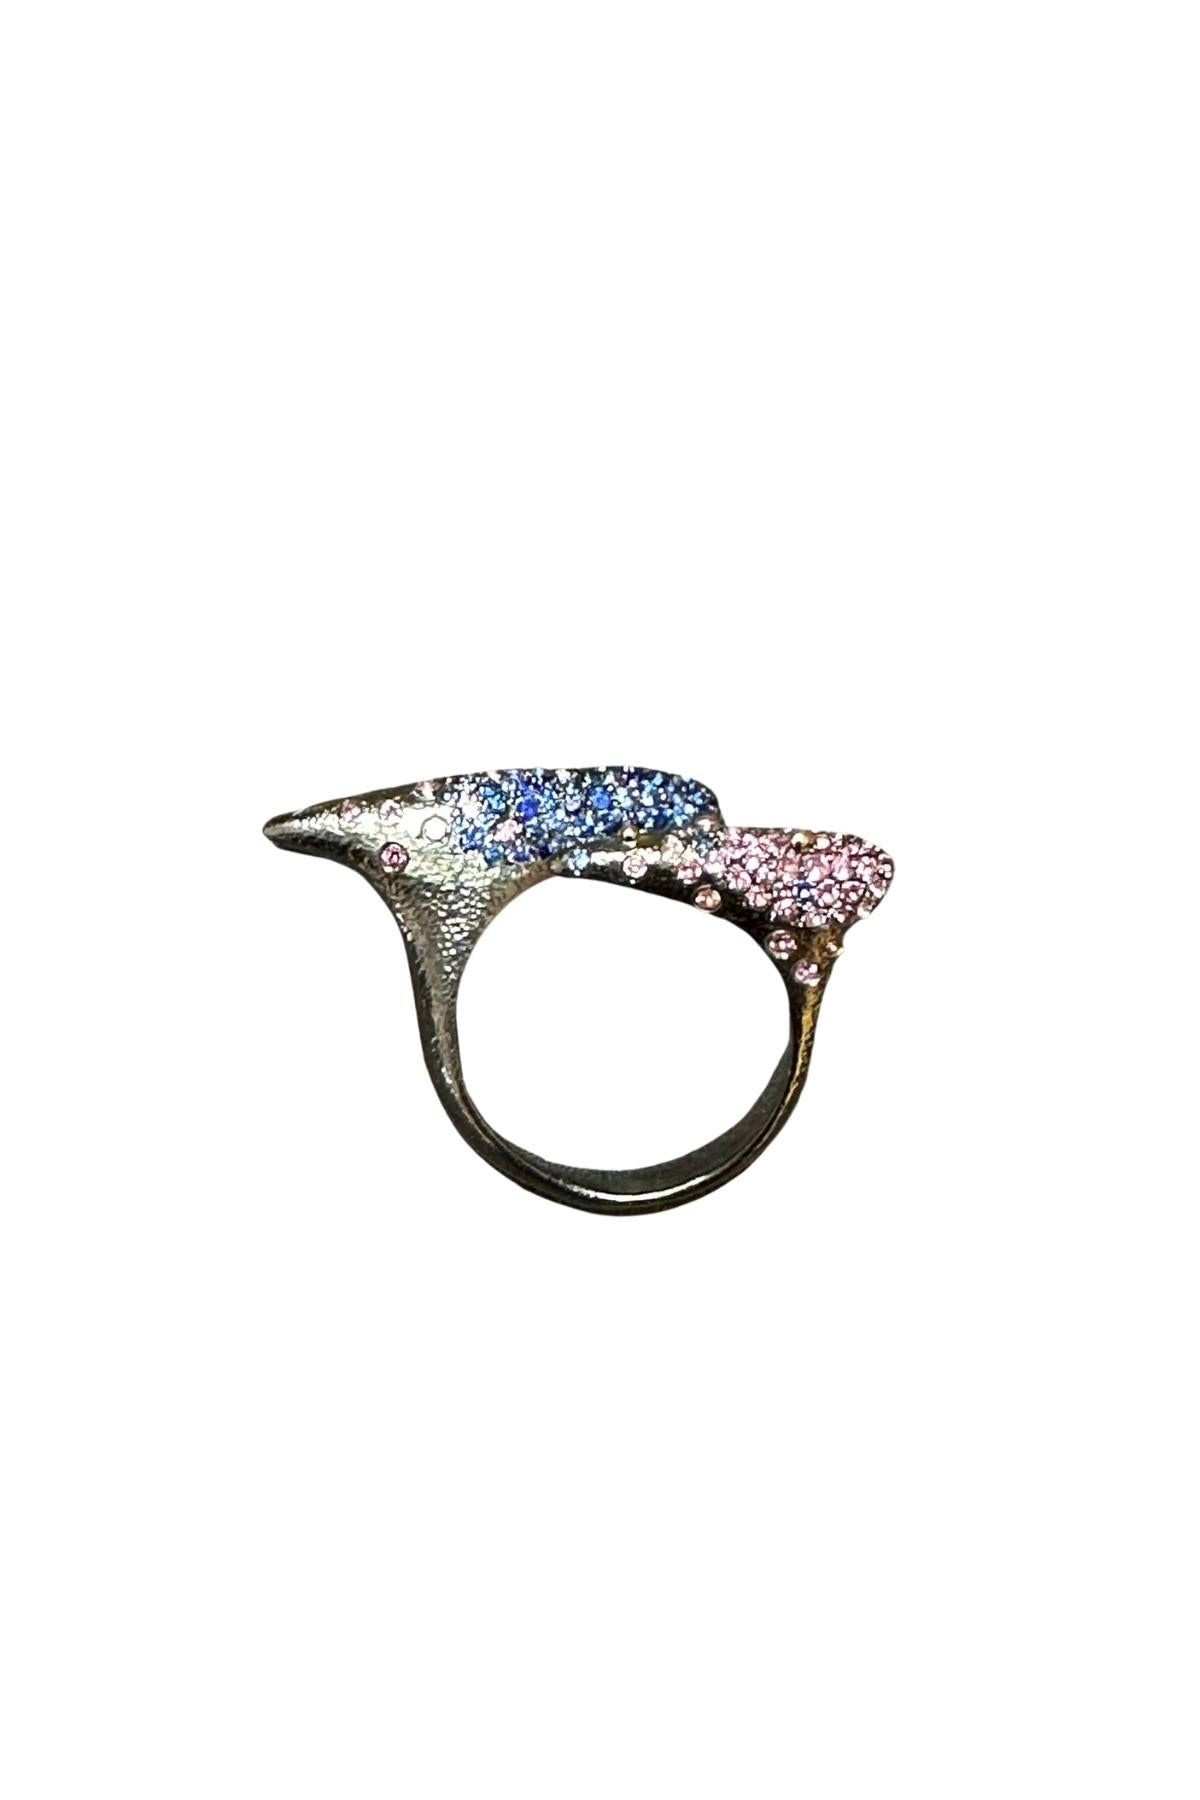 Brilliant Cut Arman  Suciyan  Blue Sapphire and  Rhodolite Silver and  Enamel Ring   For Sale